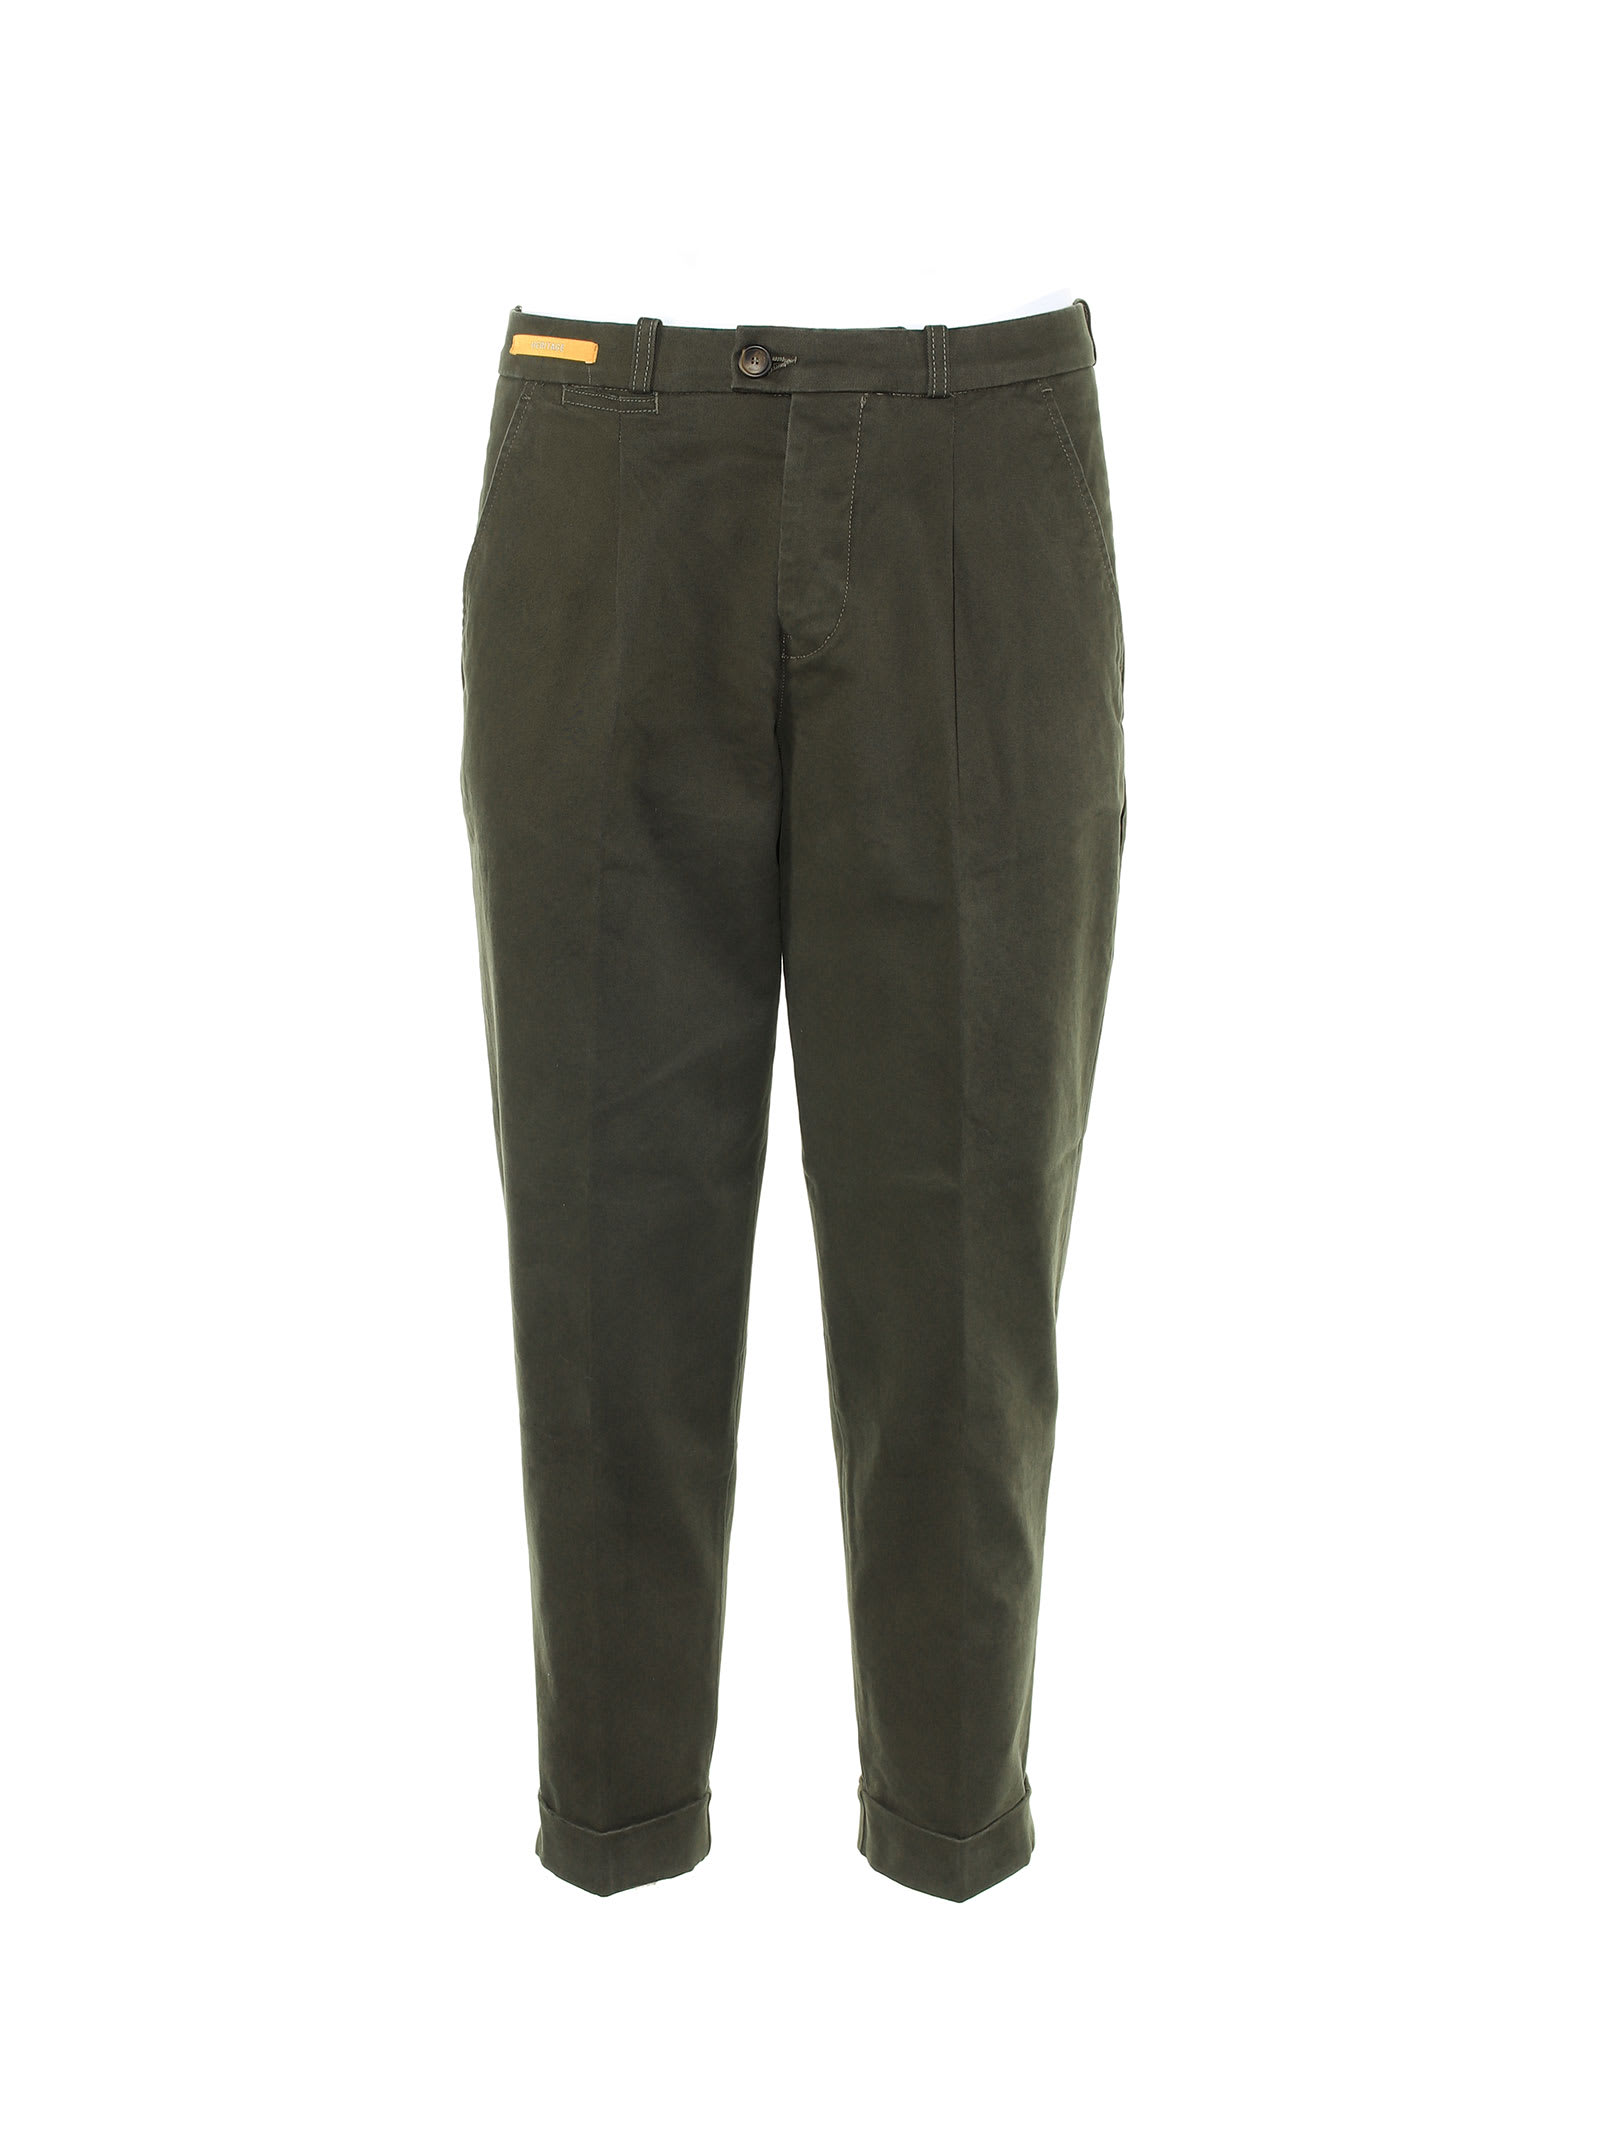 Re-HasH Cuffed Trousers